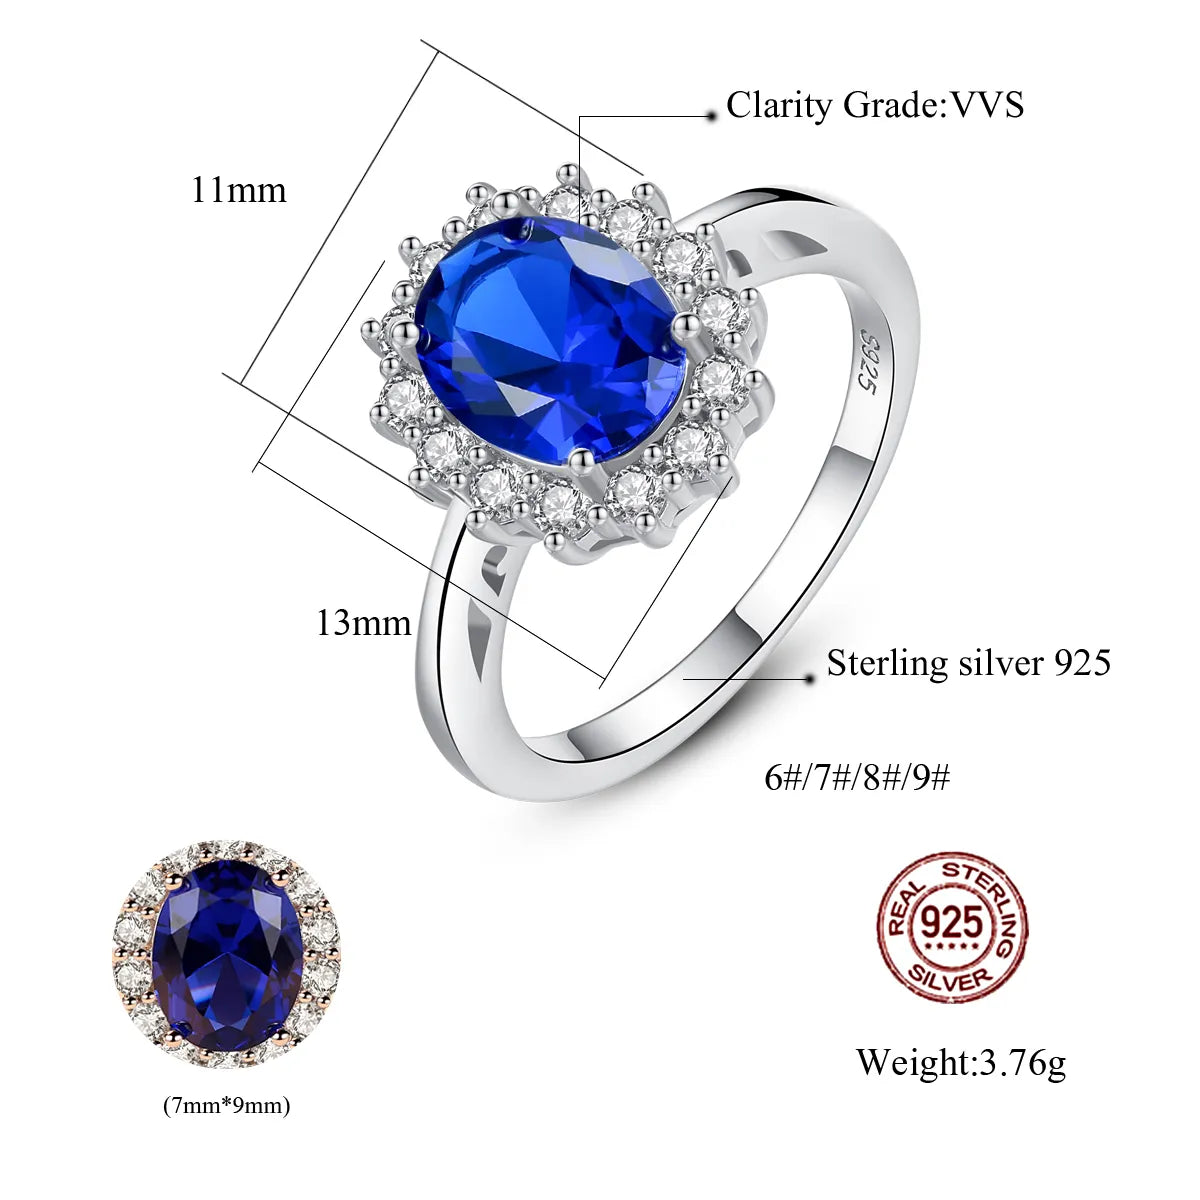 Czcity Synthetic Gemstone Sapphire 925 Sterling Silver Rings For Women Luxury Diana Princess Wedding Bridal Charm Fine Jewellery